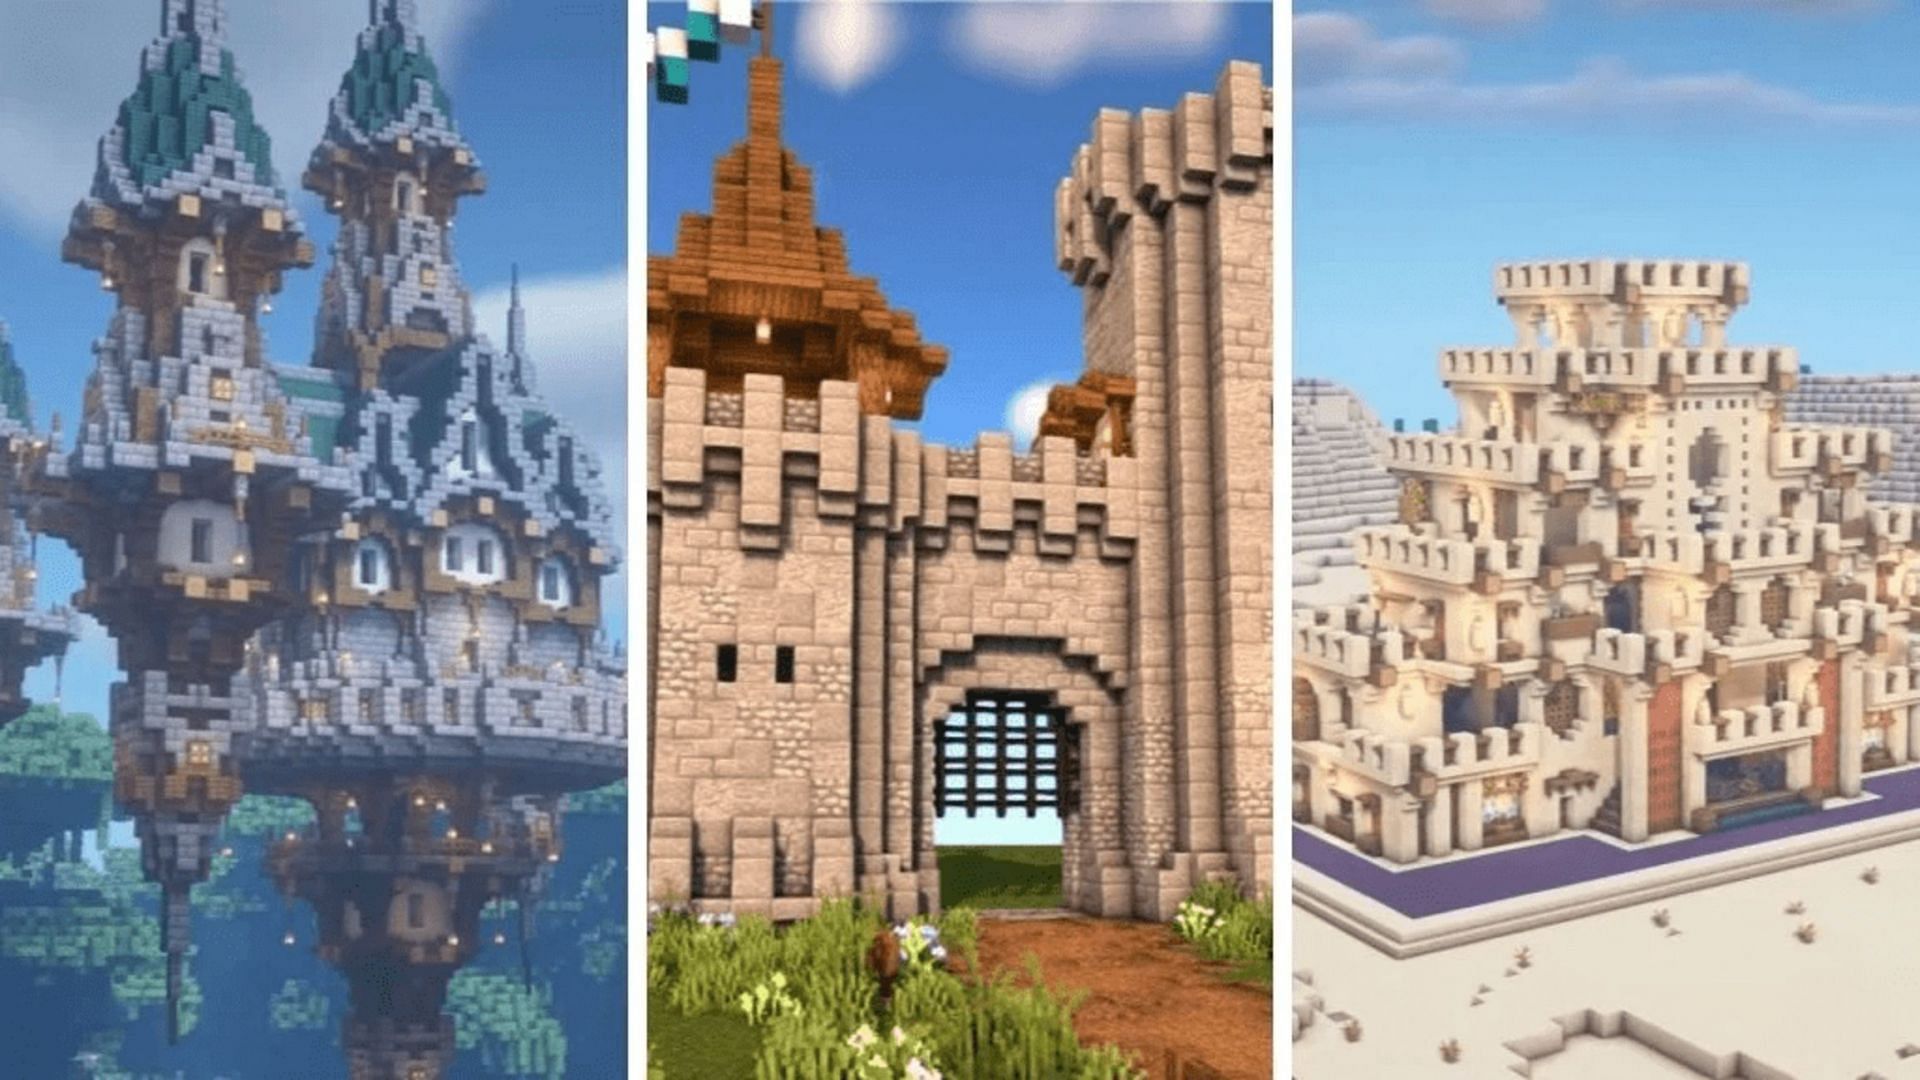 No castle is built in a day (Image via Mojang)